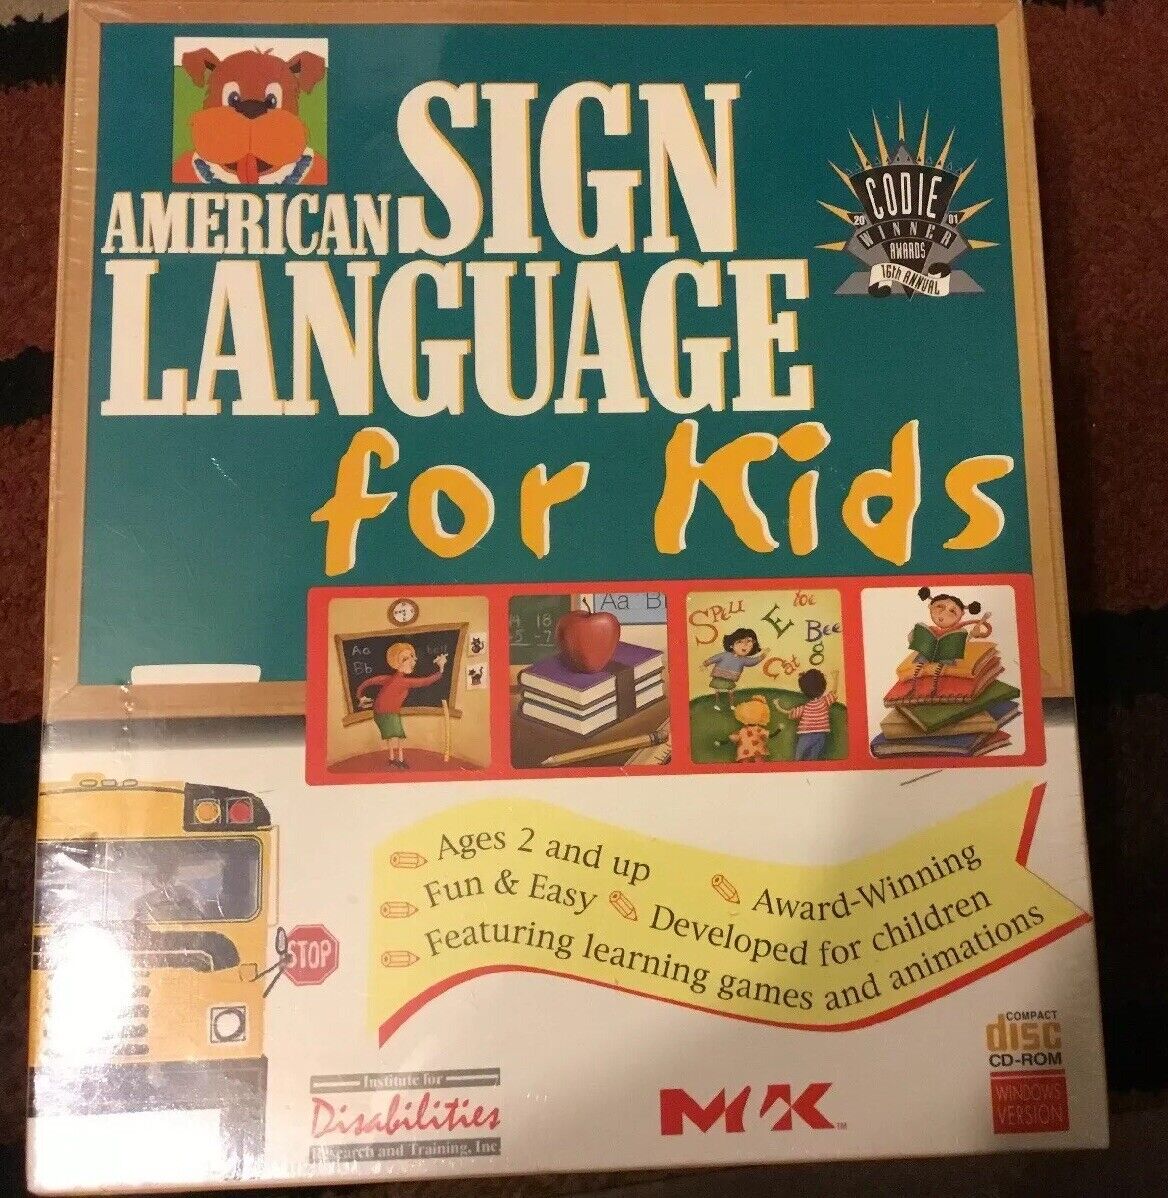 American Sign Language For Kids & Dictionary Sealed